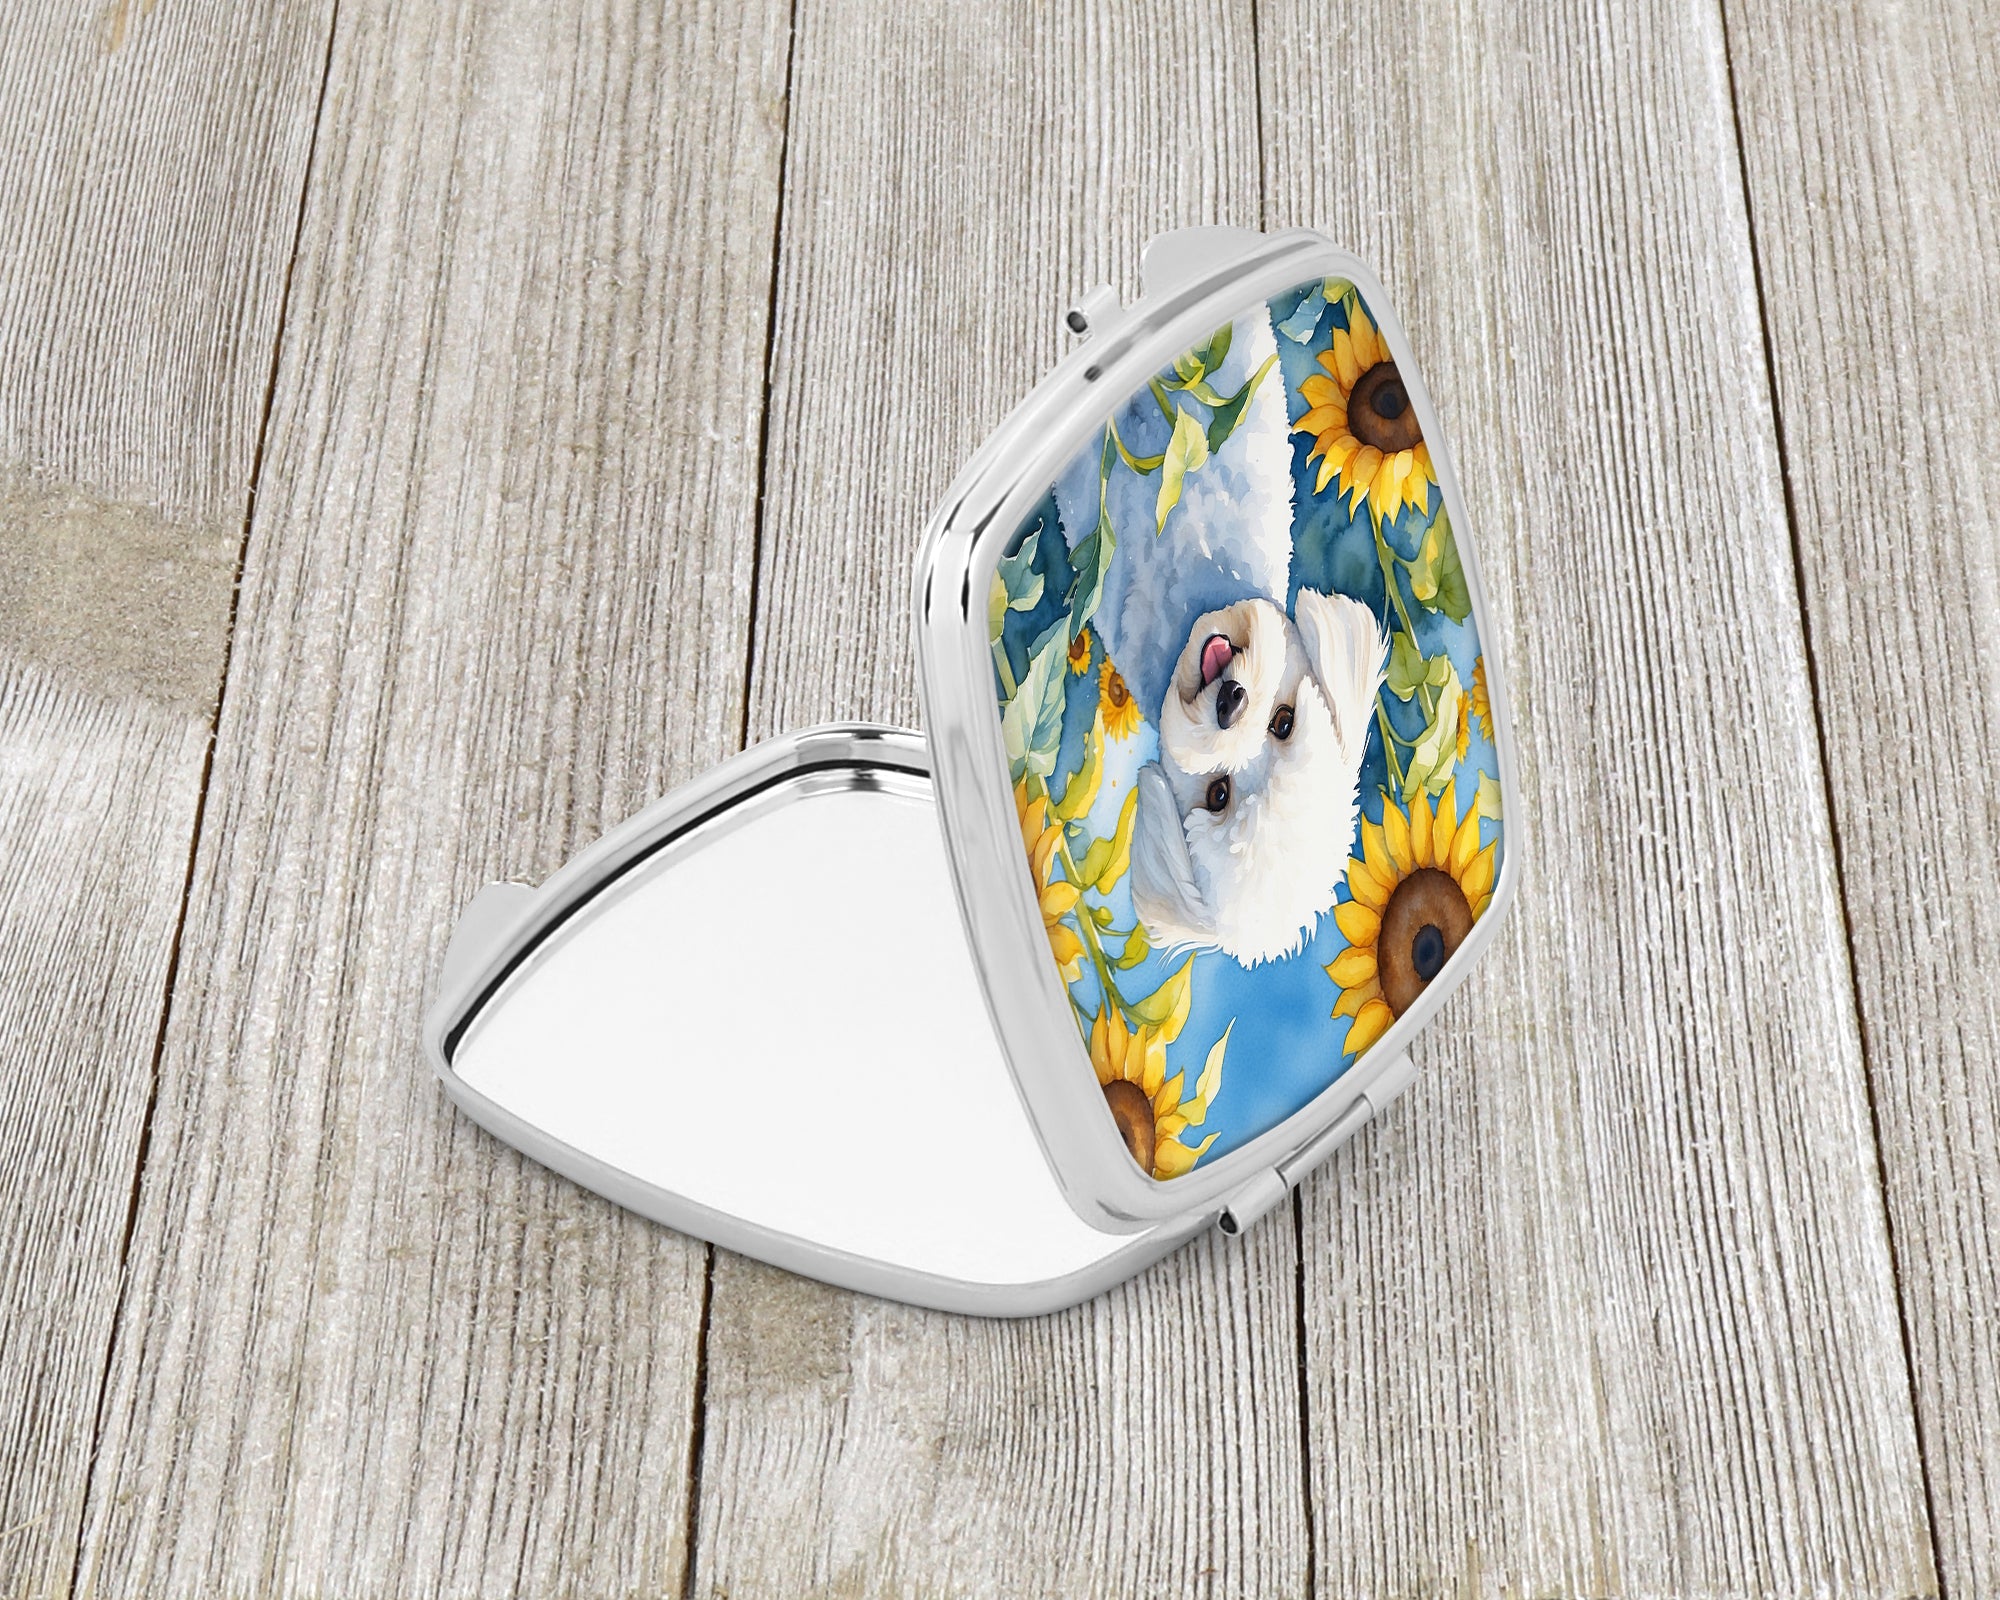 Bichon Frise in Sunflowers Compact Mirror